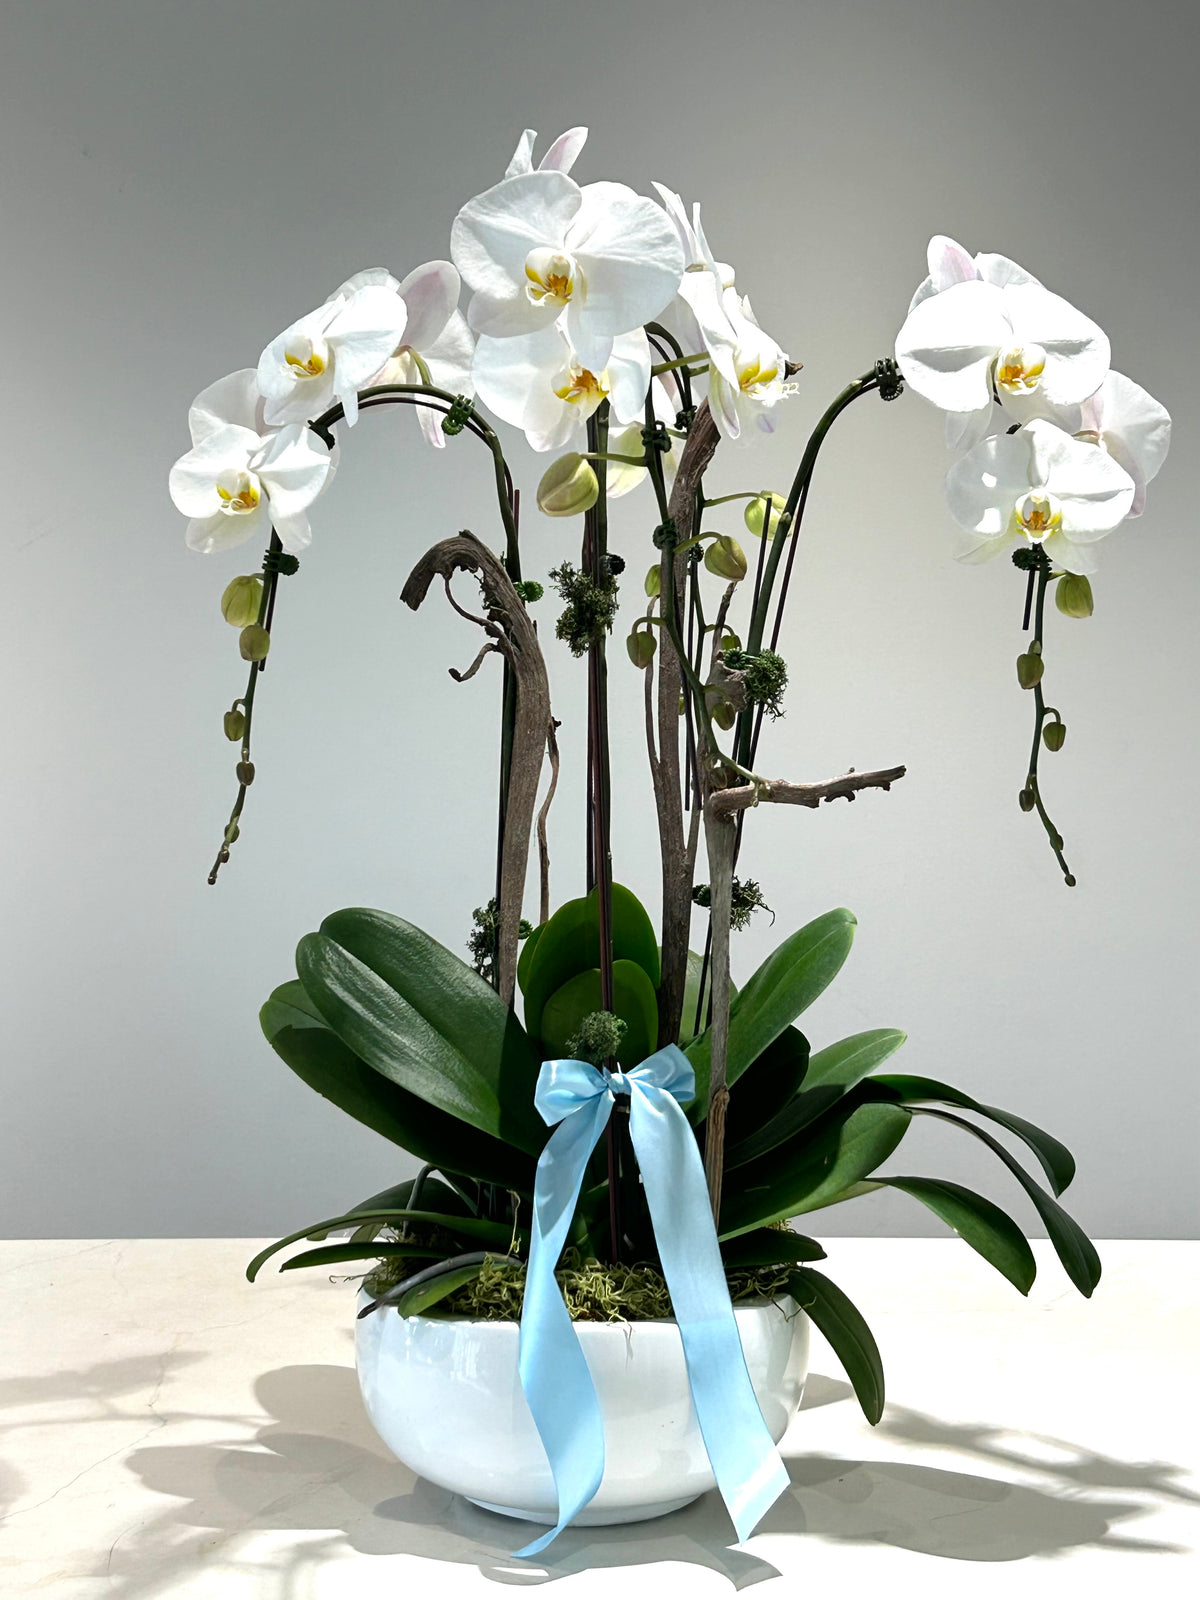 How to take care of orchid plants?